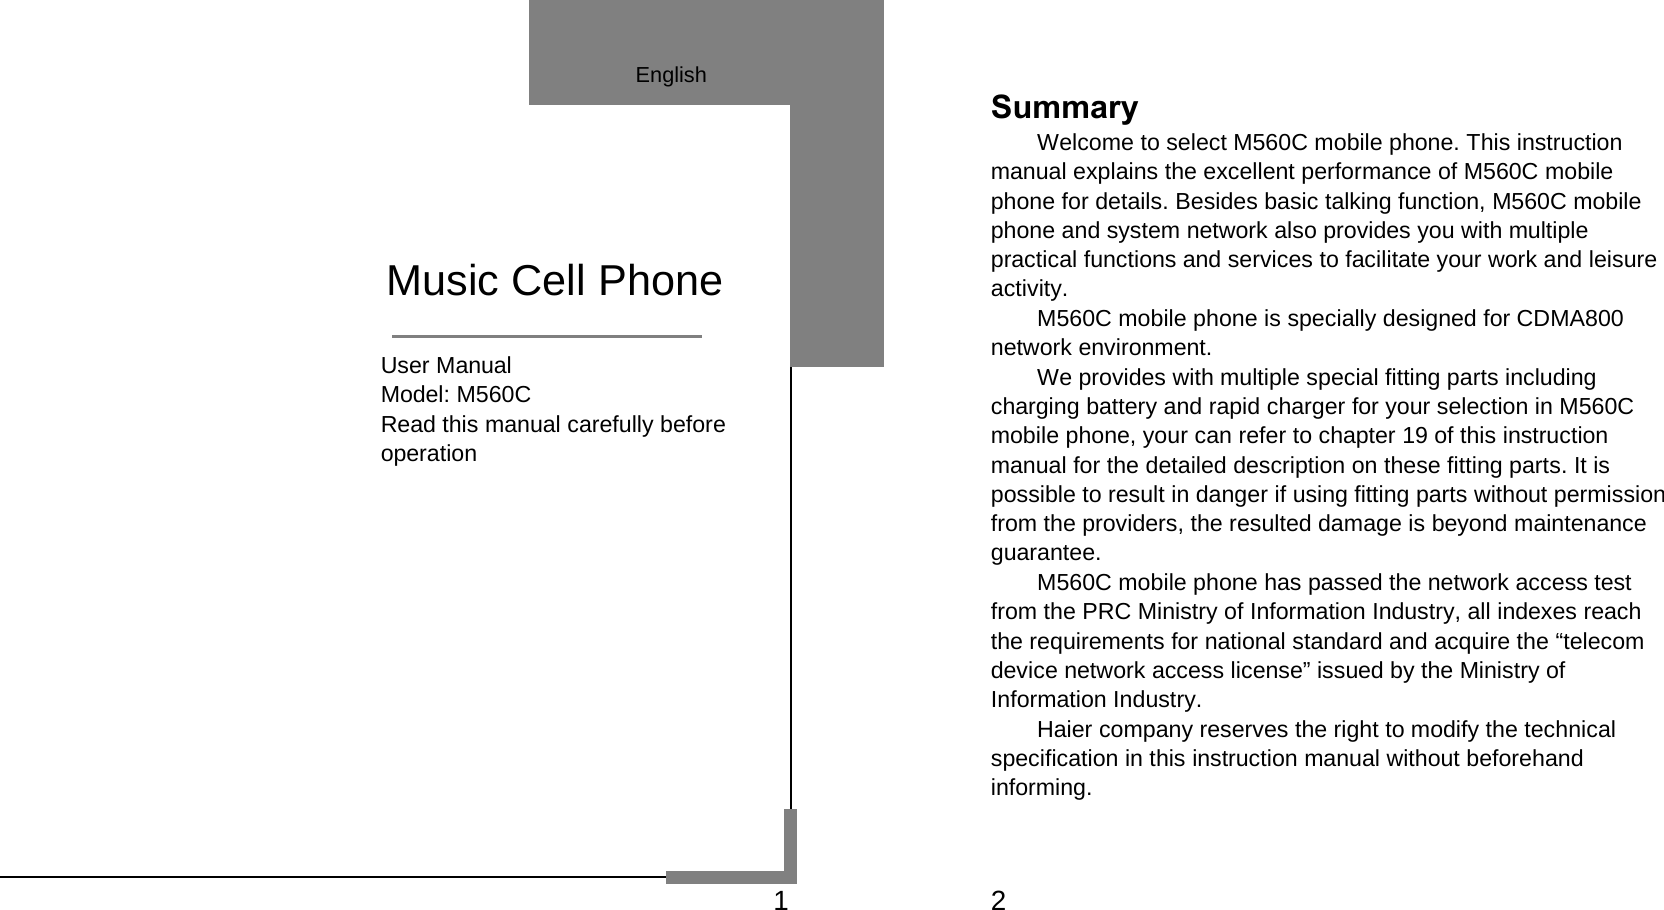   1                                User Manual                        Model: M560C                        Read this manual carefully before                        operation              Music Cell Phone English    2 Summary Welcome to select M560C mobile phone. This instruction manual explains the excellent performance of M560C mobile phone for details. Besides basic talking function, M560C mobile phone and system network also provides you with multiple practical functions and services to facilitate your work and leisure activity. M560C mobile phone is specially designed for CDMA800 network environment. We provides with multiple special fitting parts including charging battery and rapid charger for your selection in M560C mobile phone, your can refer to chapter 19 of this instruction manual for the detailed description on these fitting parts. It is possible to result in danger if using fitting parts without permission from the providers, the resulted damage is beyond maintenance guarantee. M560C mobile phone has passed the network access test from the PRC Ministry of Information Industry, all indexes reach the requirements for national standard and acquire the “telecom device network access license” issued by the Ministry of   Information Industry.     Haier company reserves the right to modify the technical specification in this instruction manual without beforehand informing. 